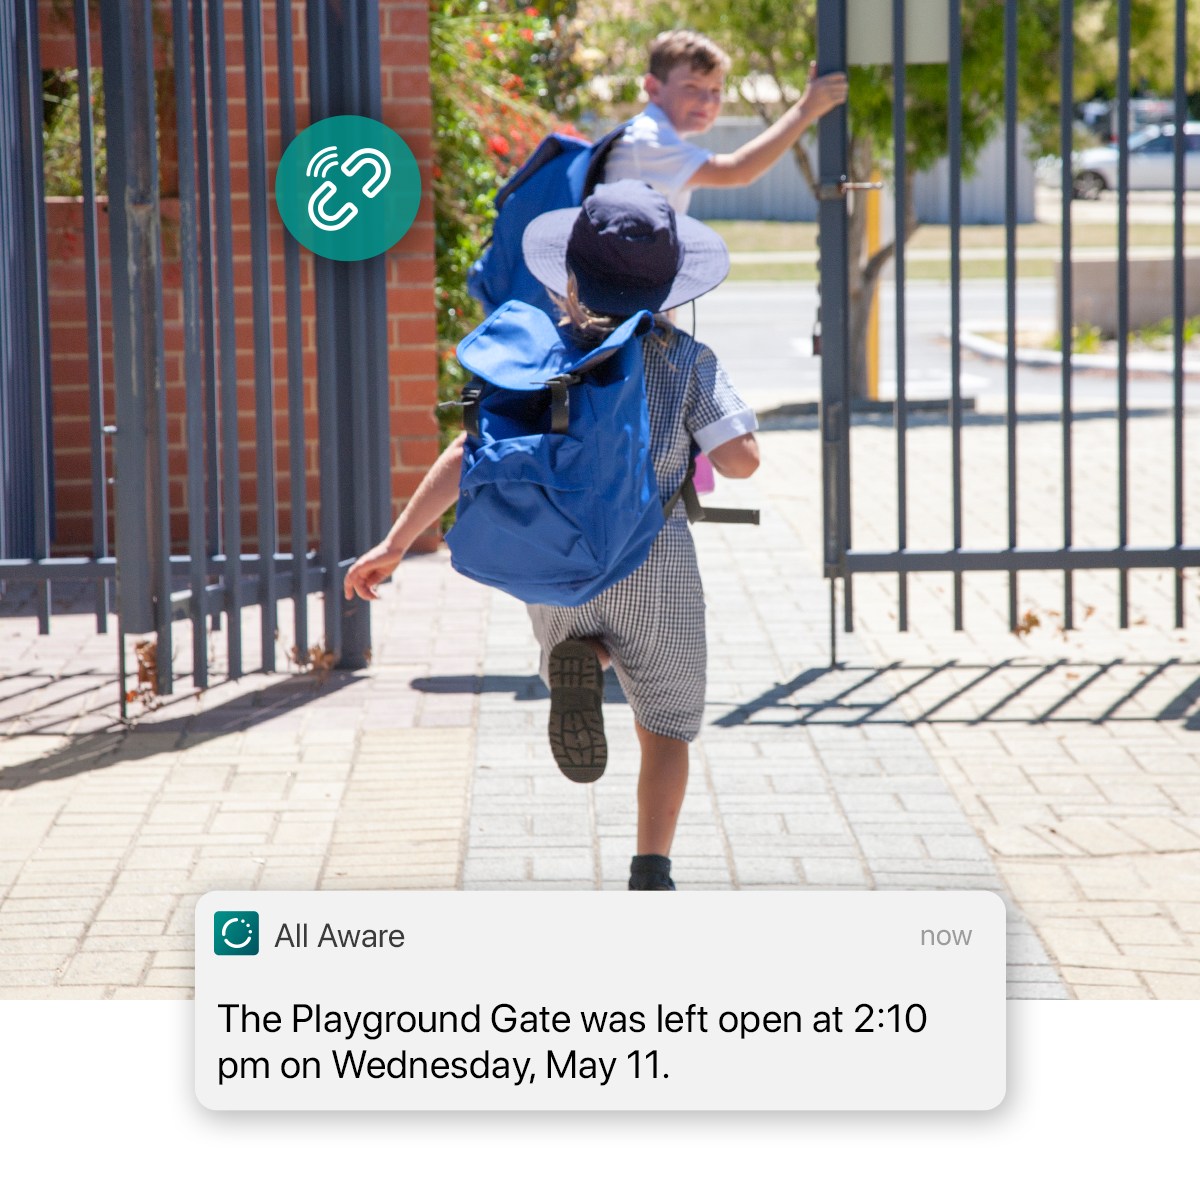 School staff receives playground gate notification from the cellular contact sensor 